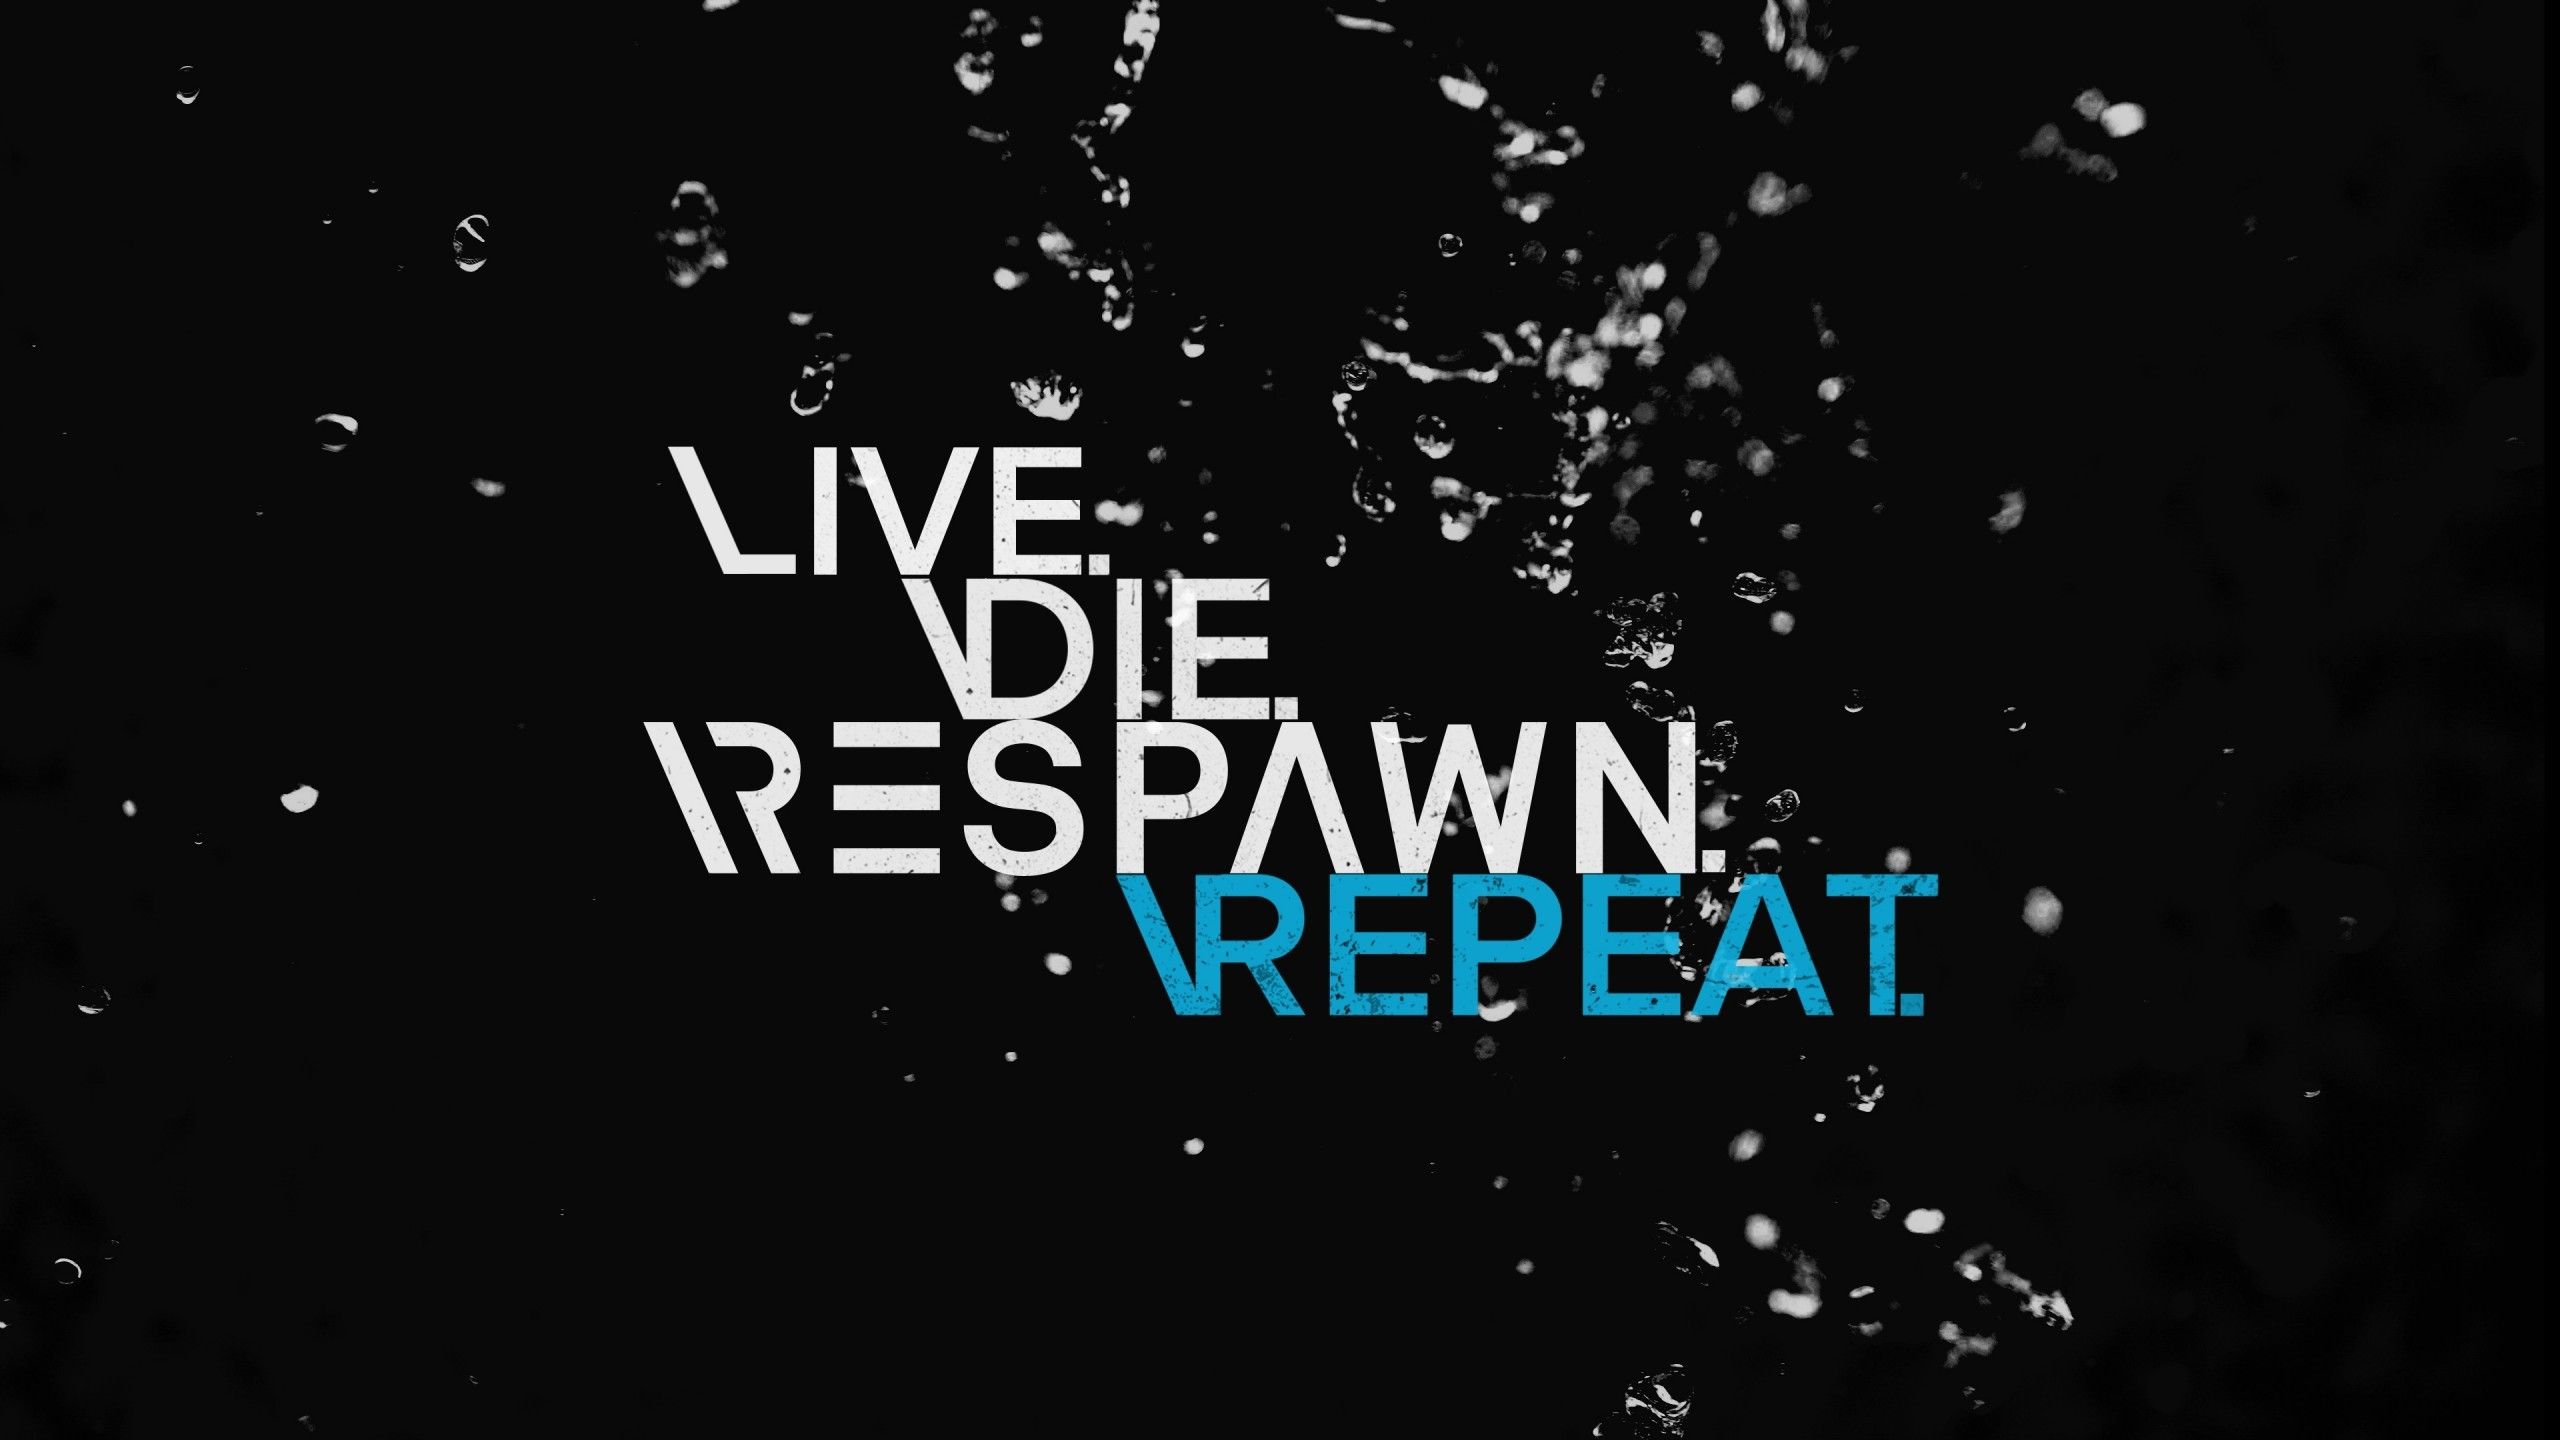 Download 2560x1440 Live Die Respawn Repeat, Gamer Life, Quote Wallpaper for iMac 27 inch